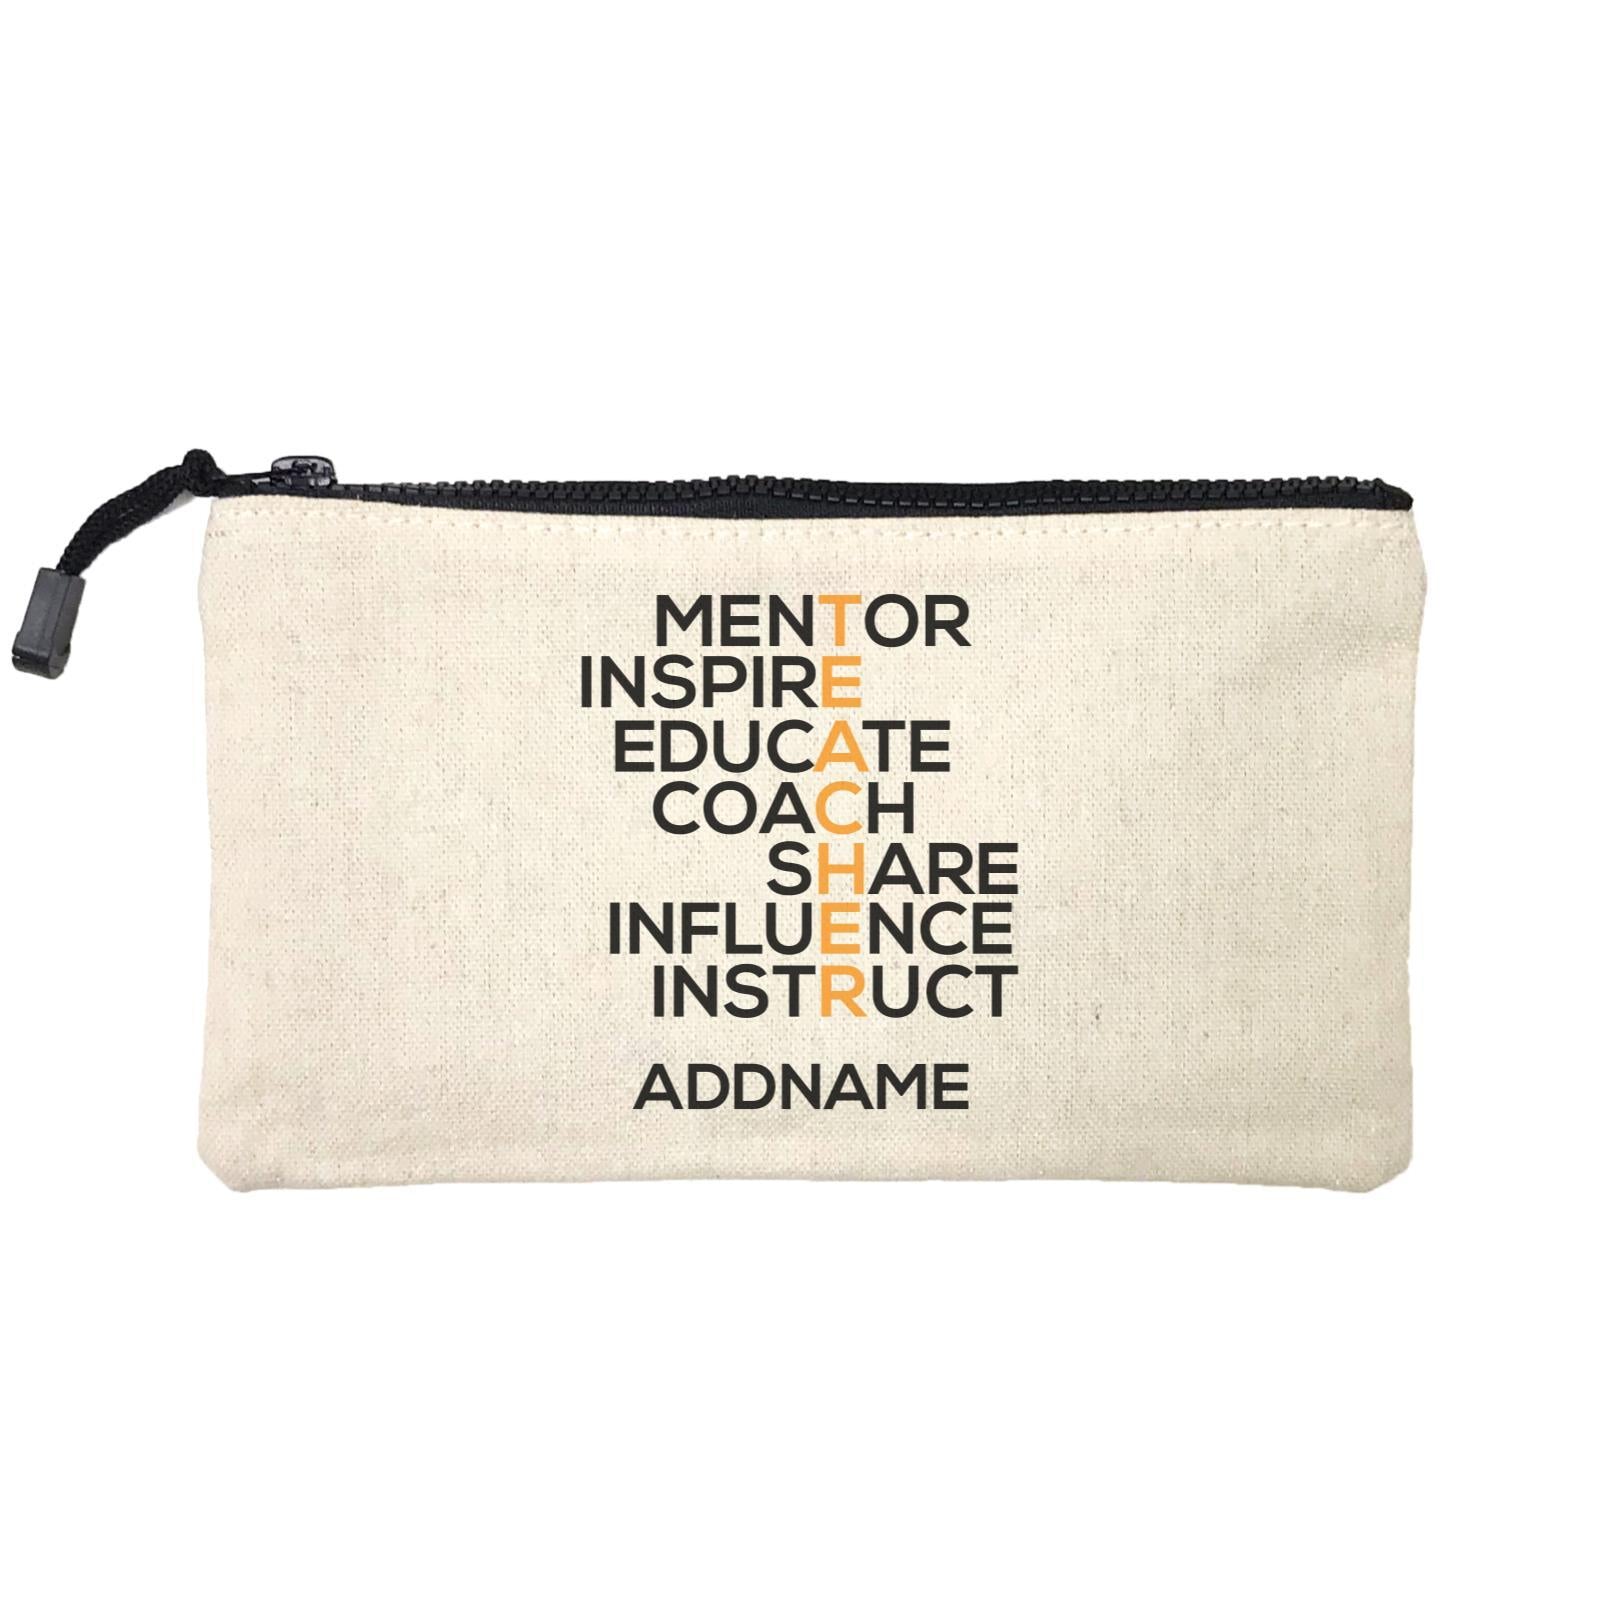 Teacher Quotes 2 Teacher Share Influence Instruct Addname Mini Accessories Stationery Pouch